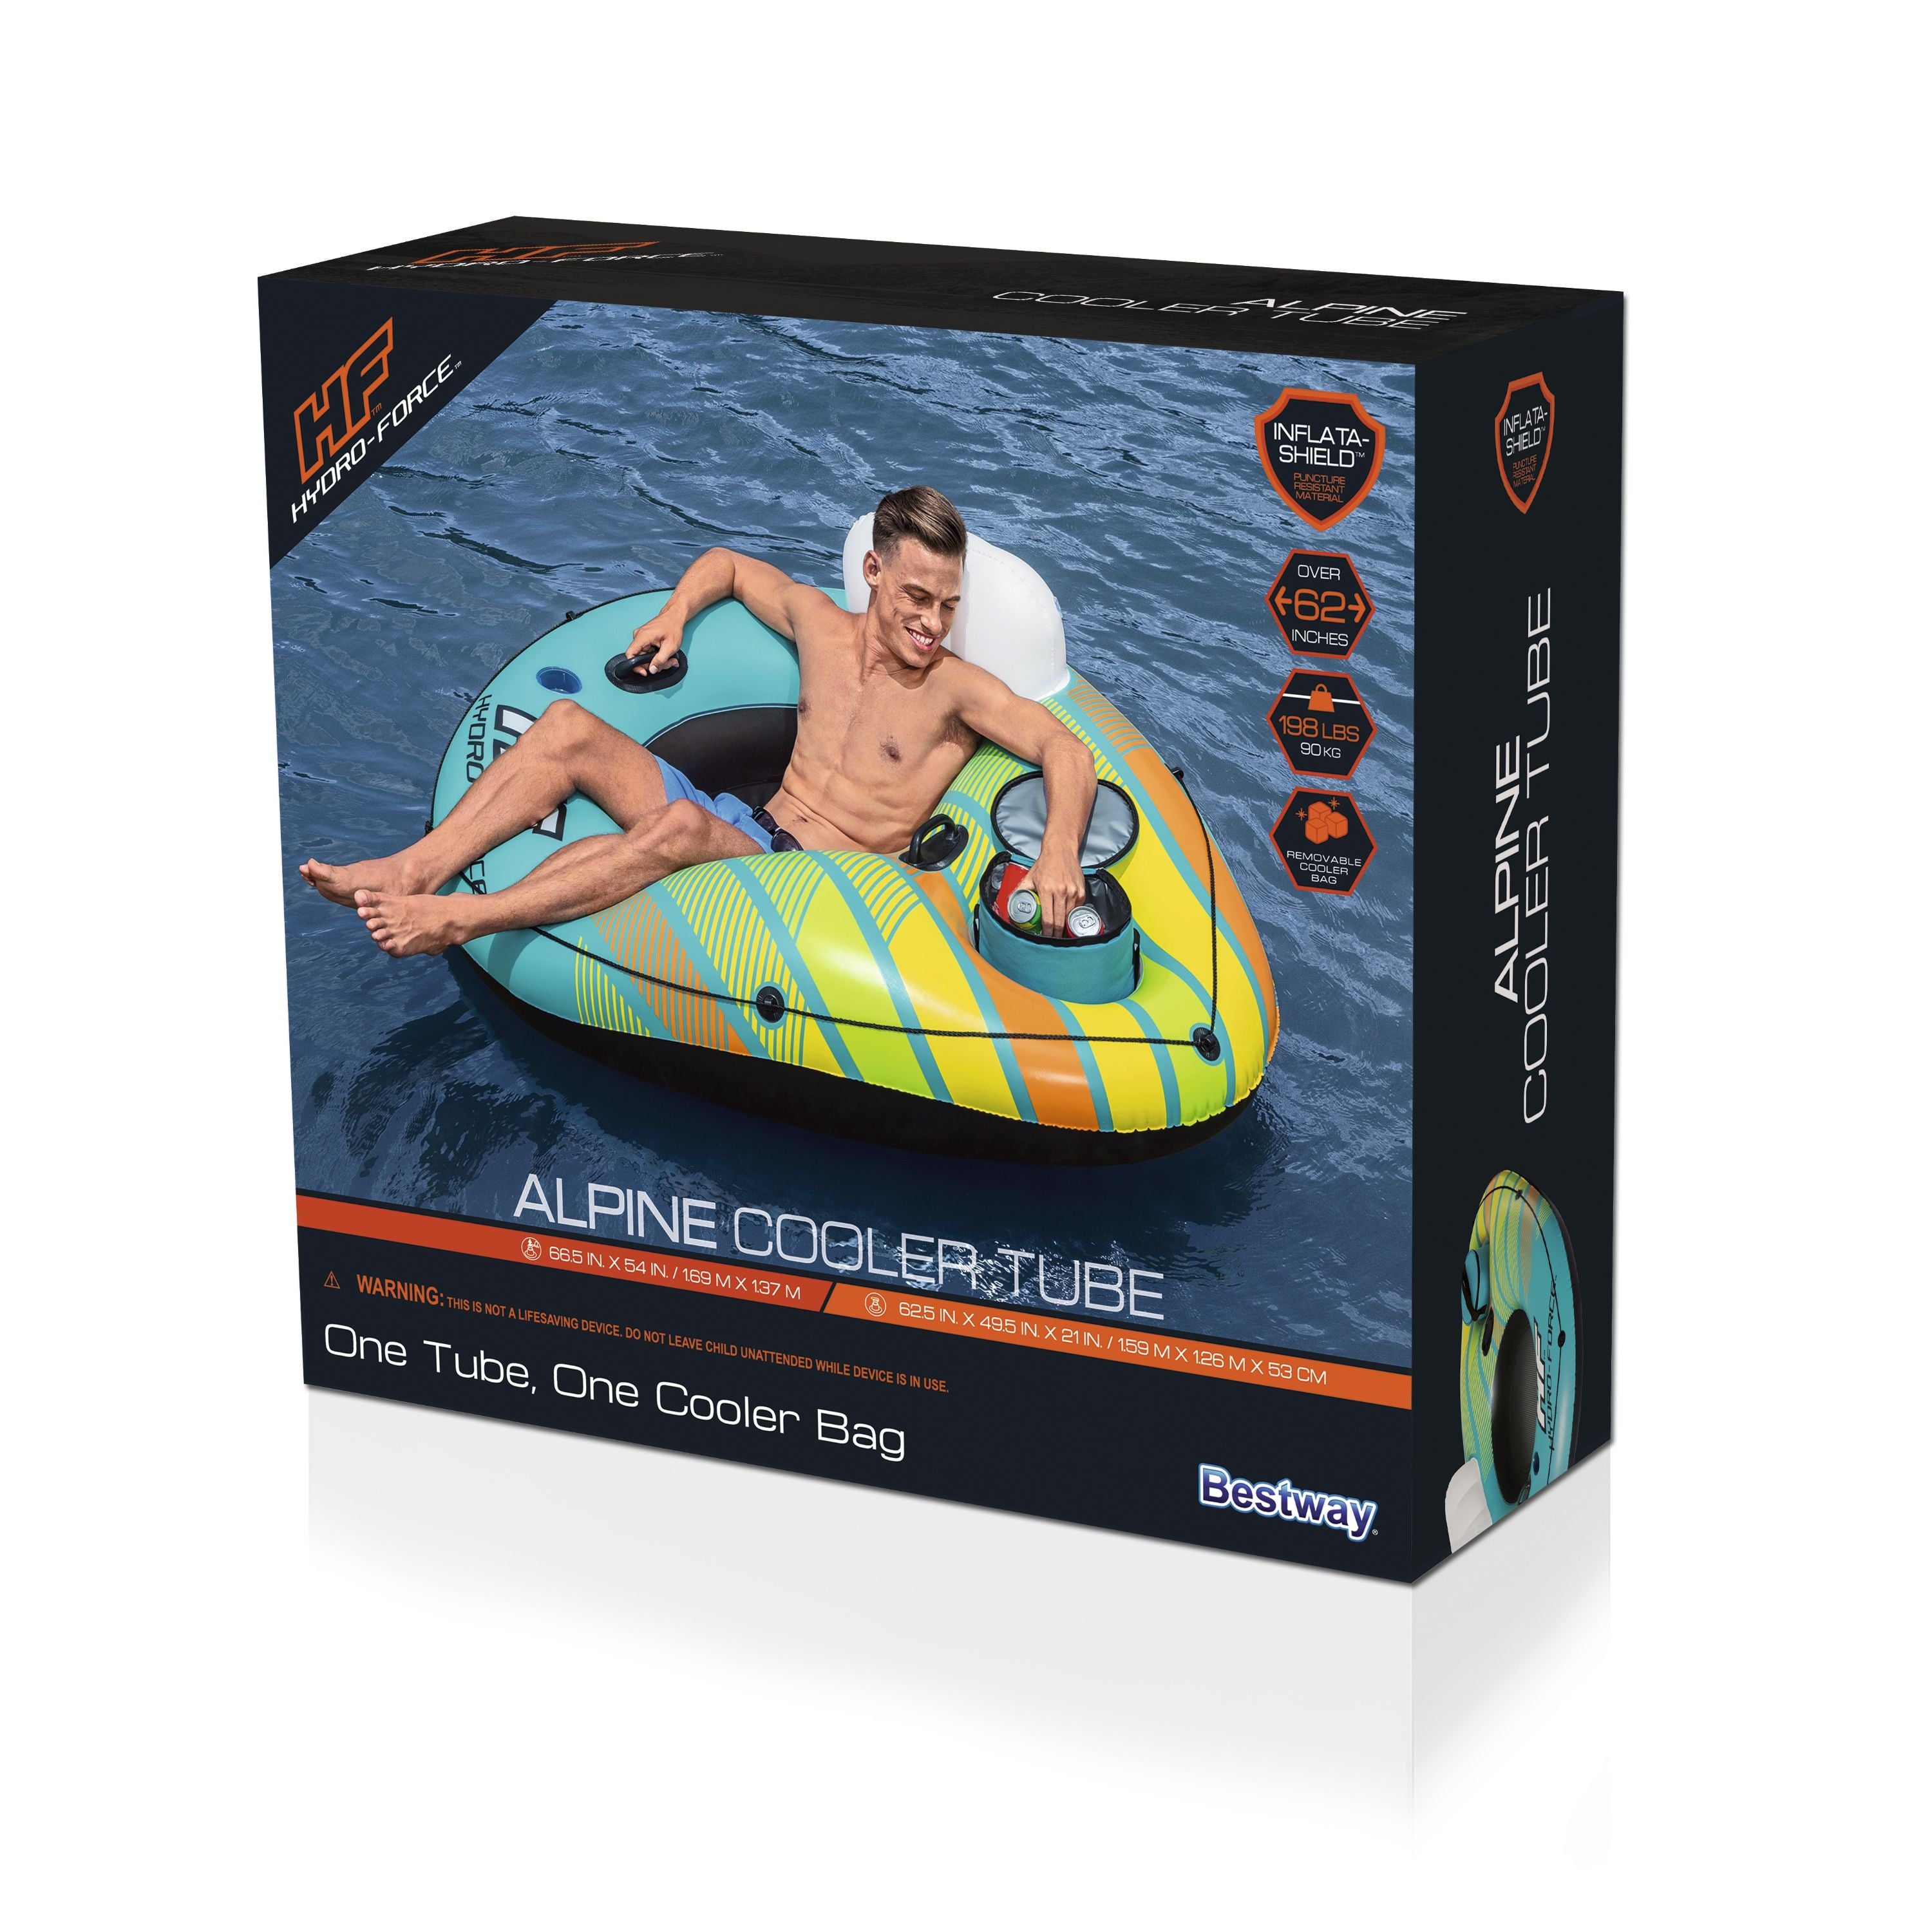 Hydro-Force Alpine Cooler Tube - Bestway River Float with cooler bag / cup holder